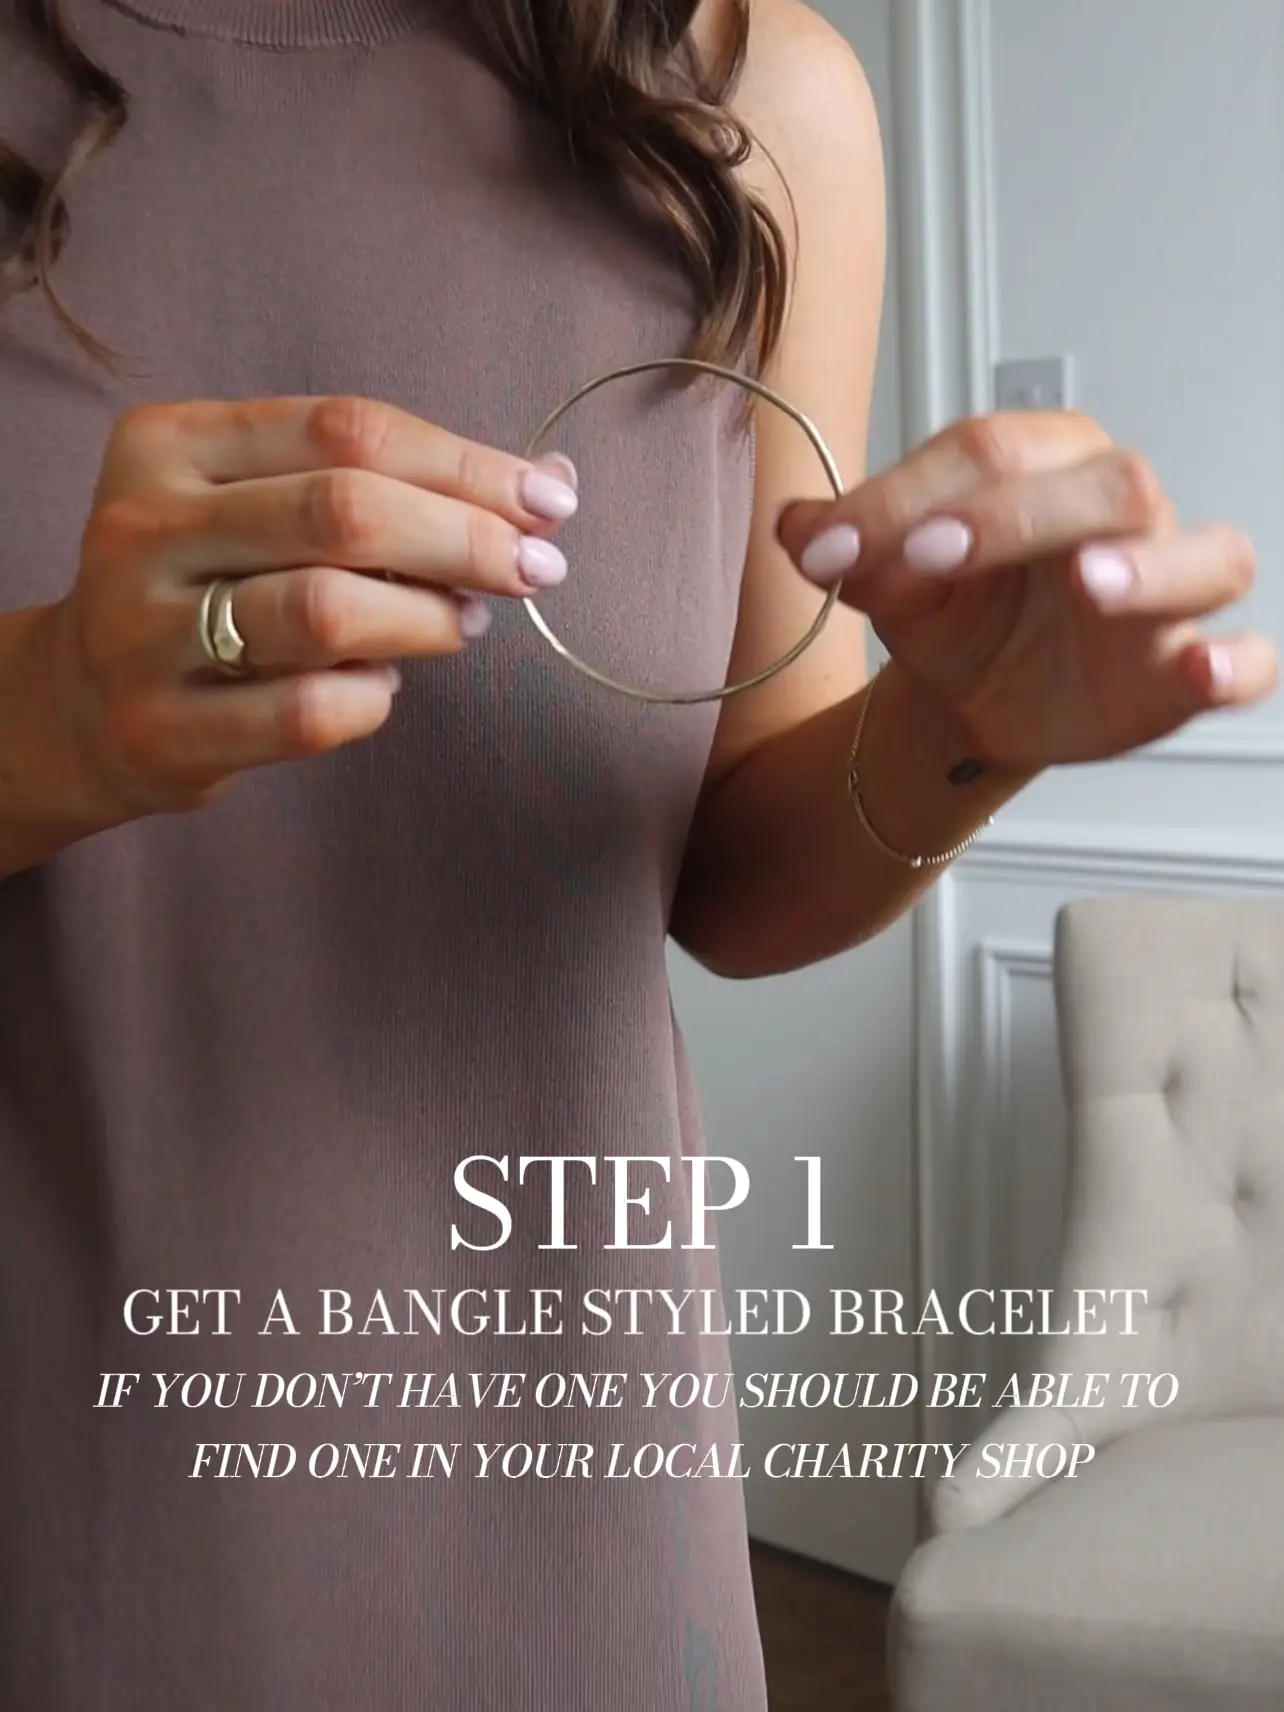 Tips for spaghetti straps causing red marks on shoulders : r/weddingplanning